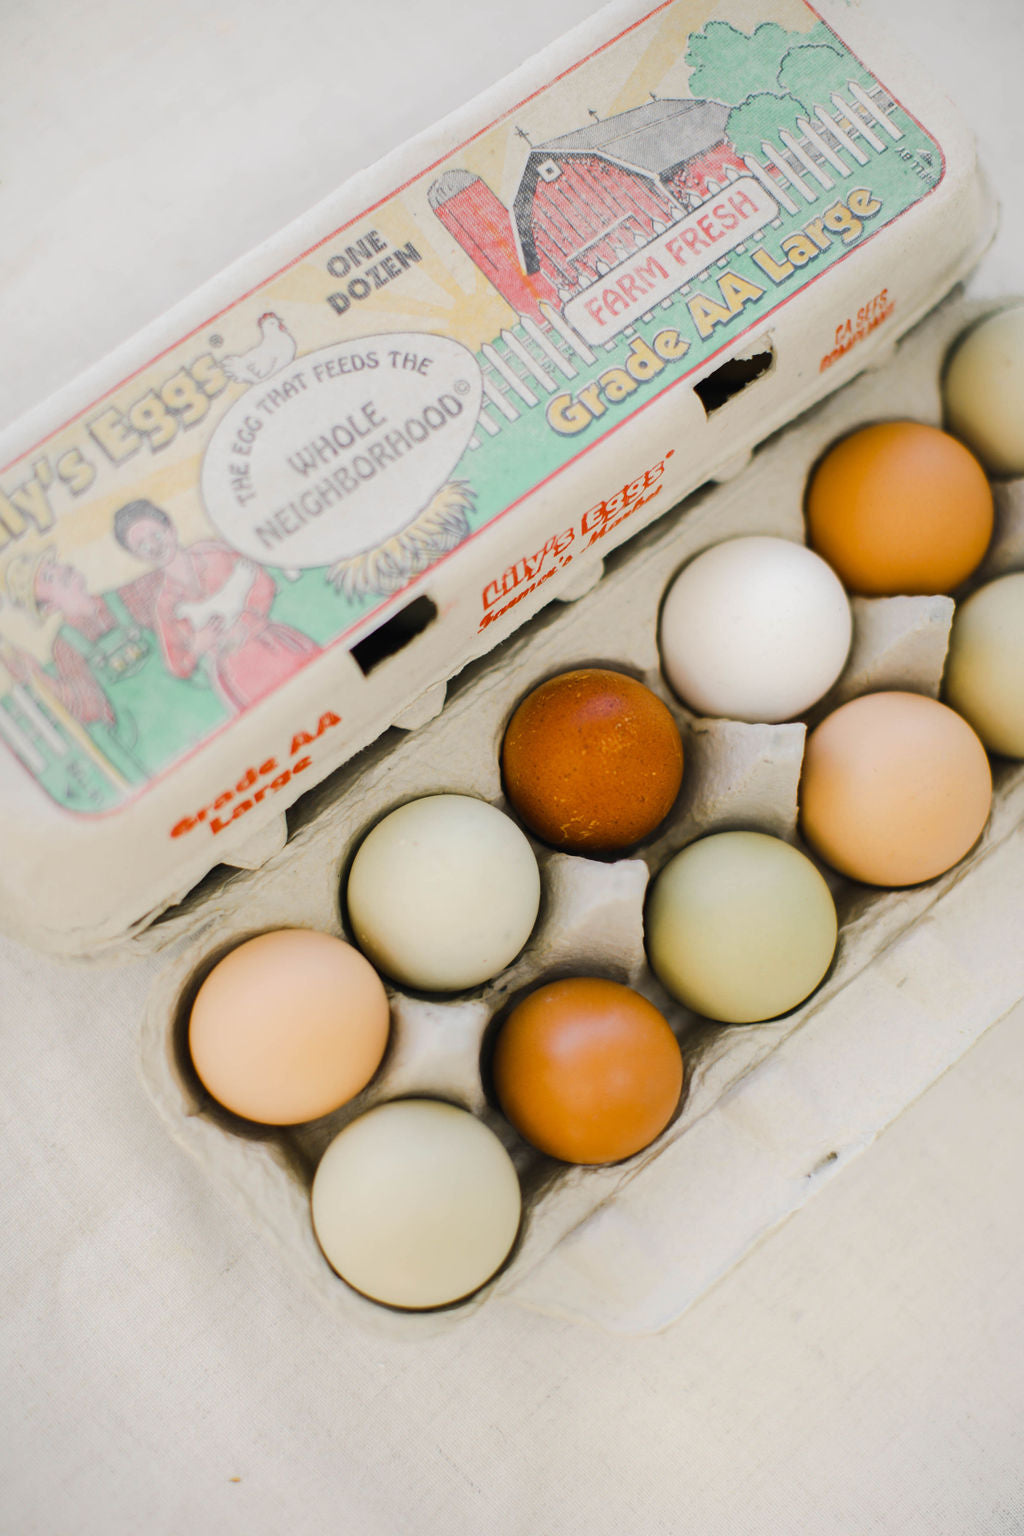 Lilly's Eggs - Brown, Heirloom & Green Eggs from Fillmore, CA